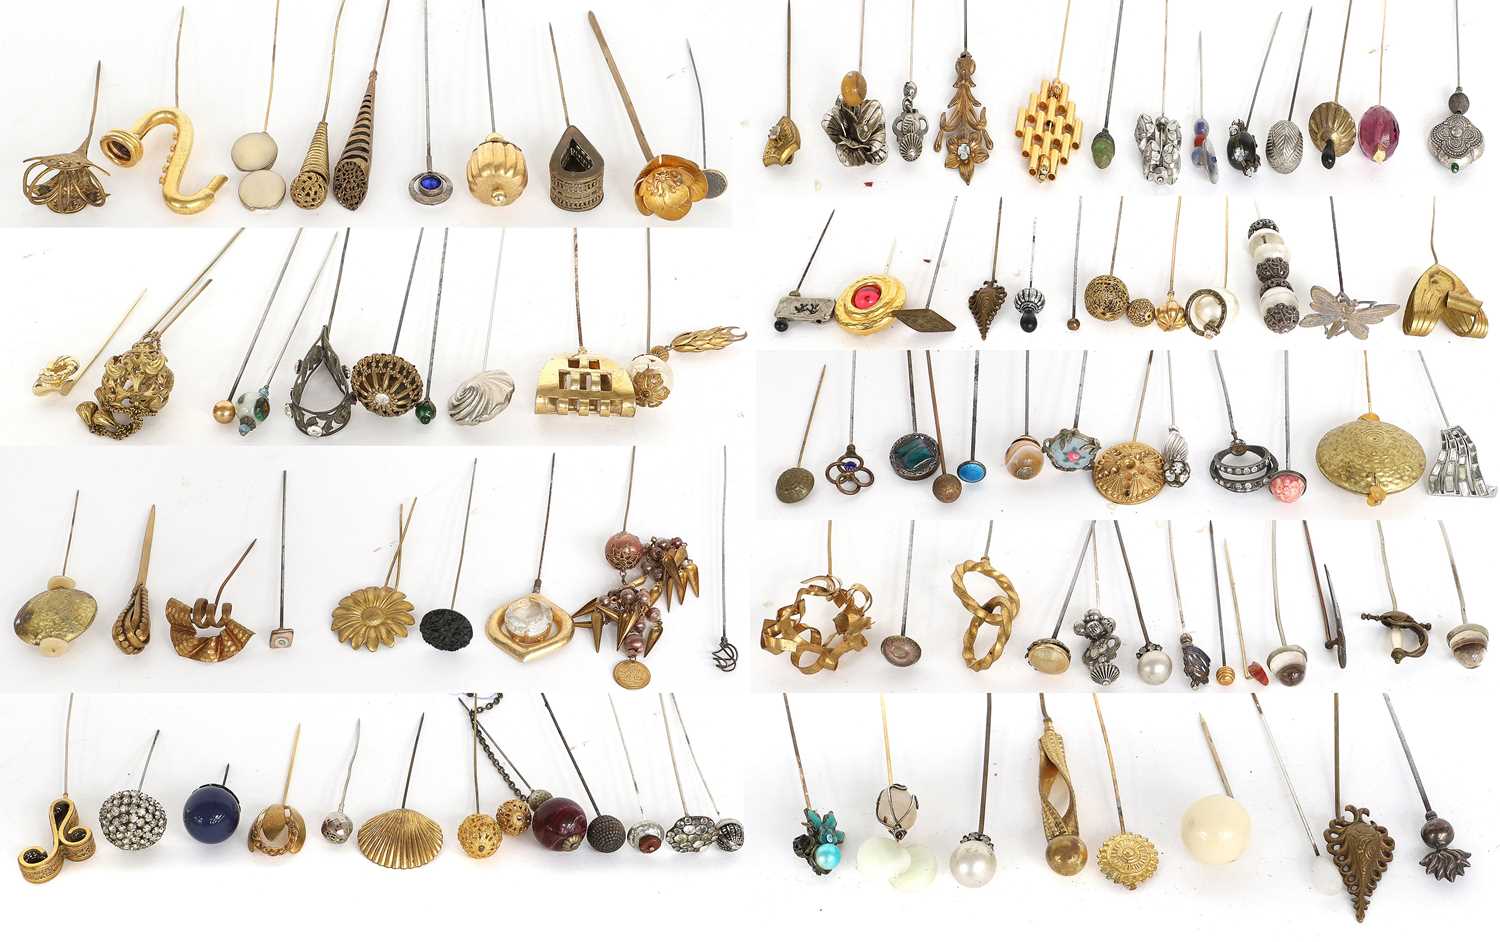 Assorted Early 20th Century Decorative Hat Pins in gilt metal, silvered metals, mounted with